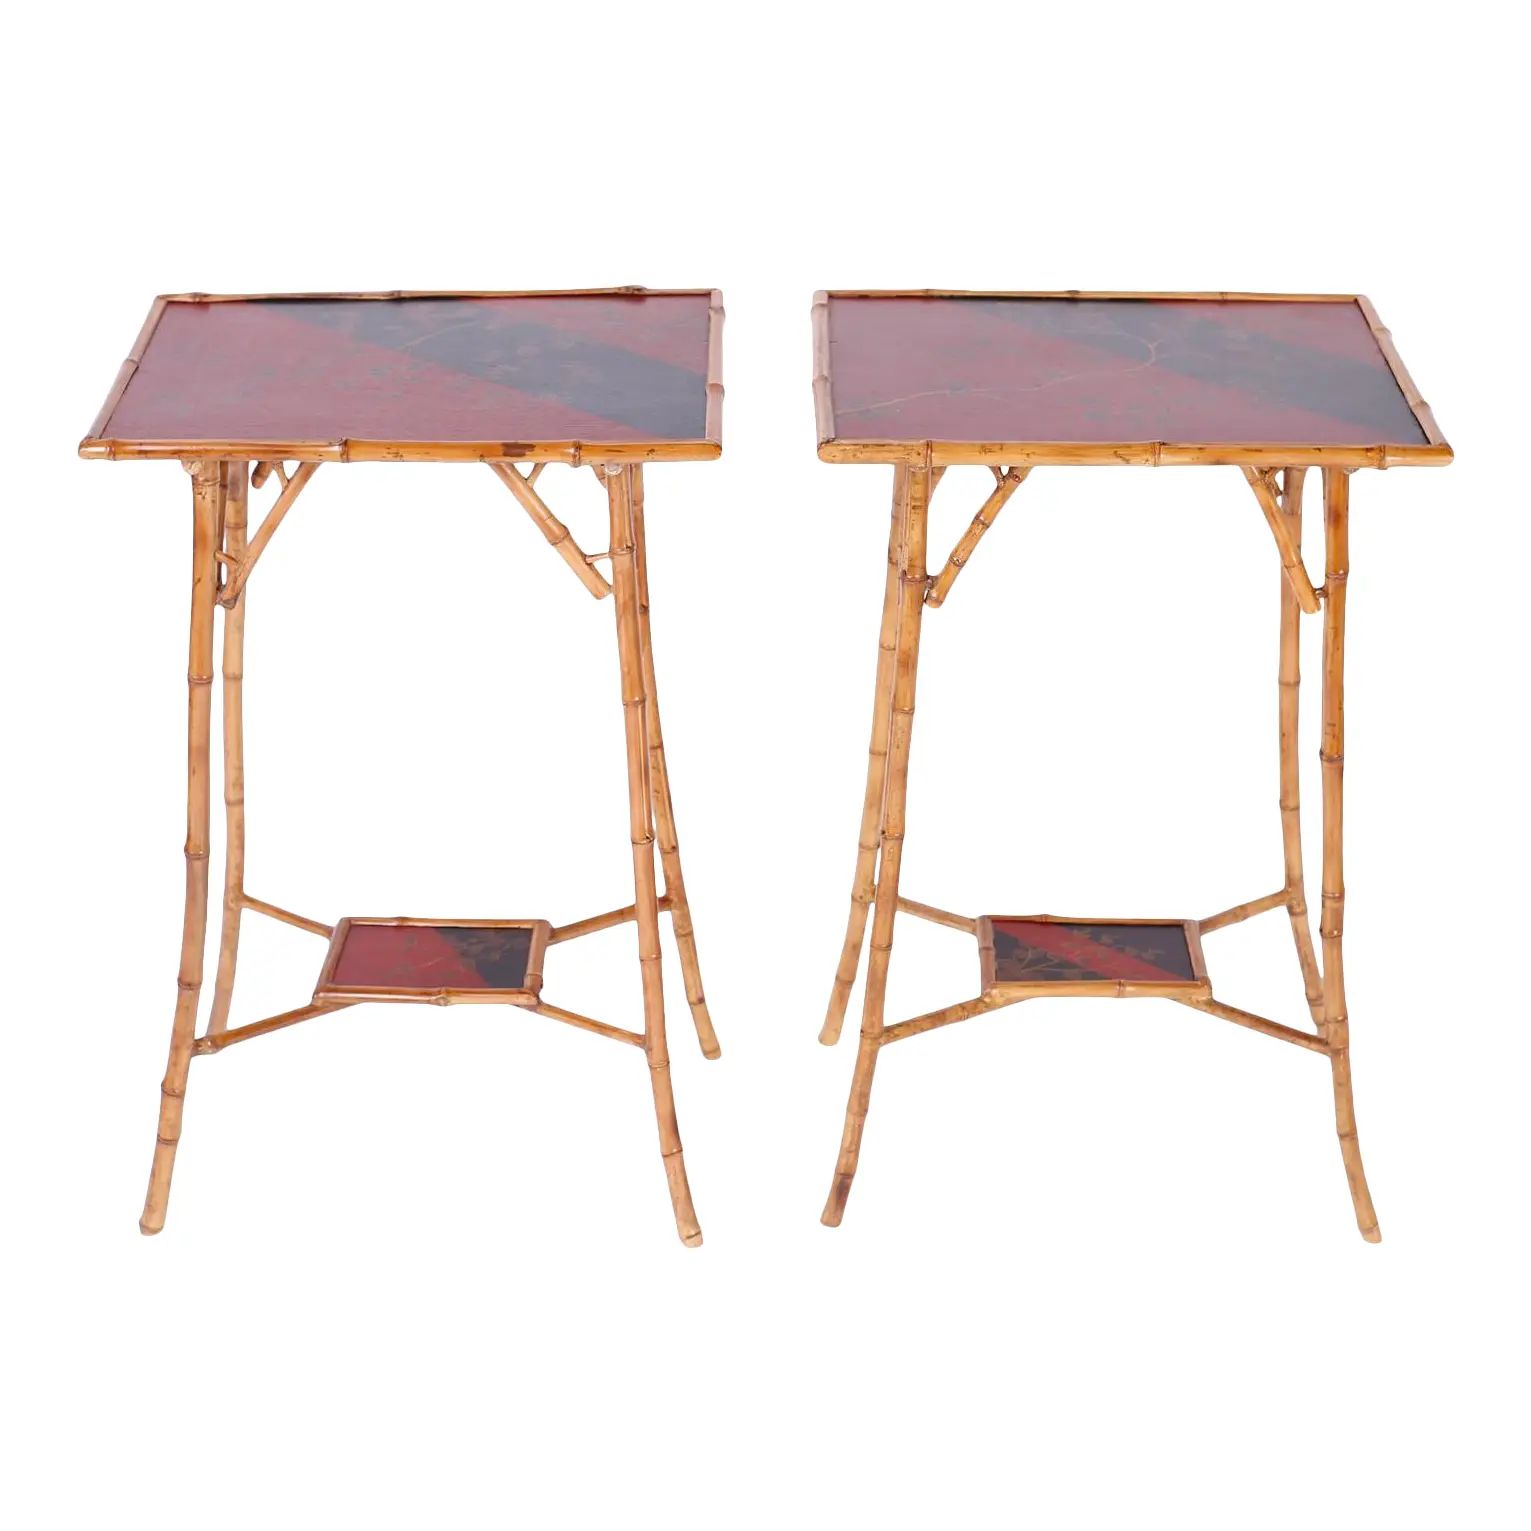 Bamboo Tables with Red and Black Lacquer Motif - A Pair | Chairish